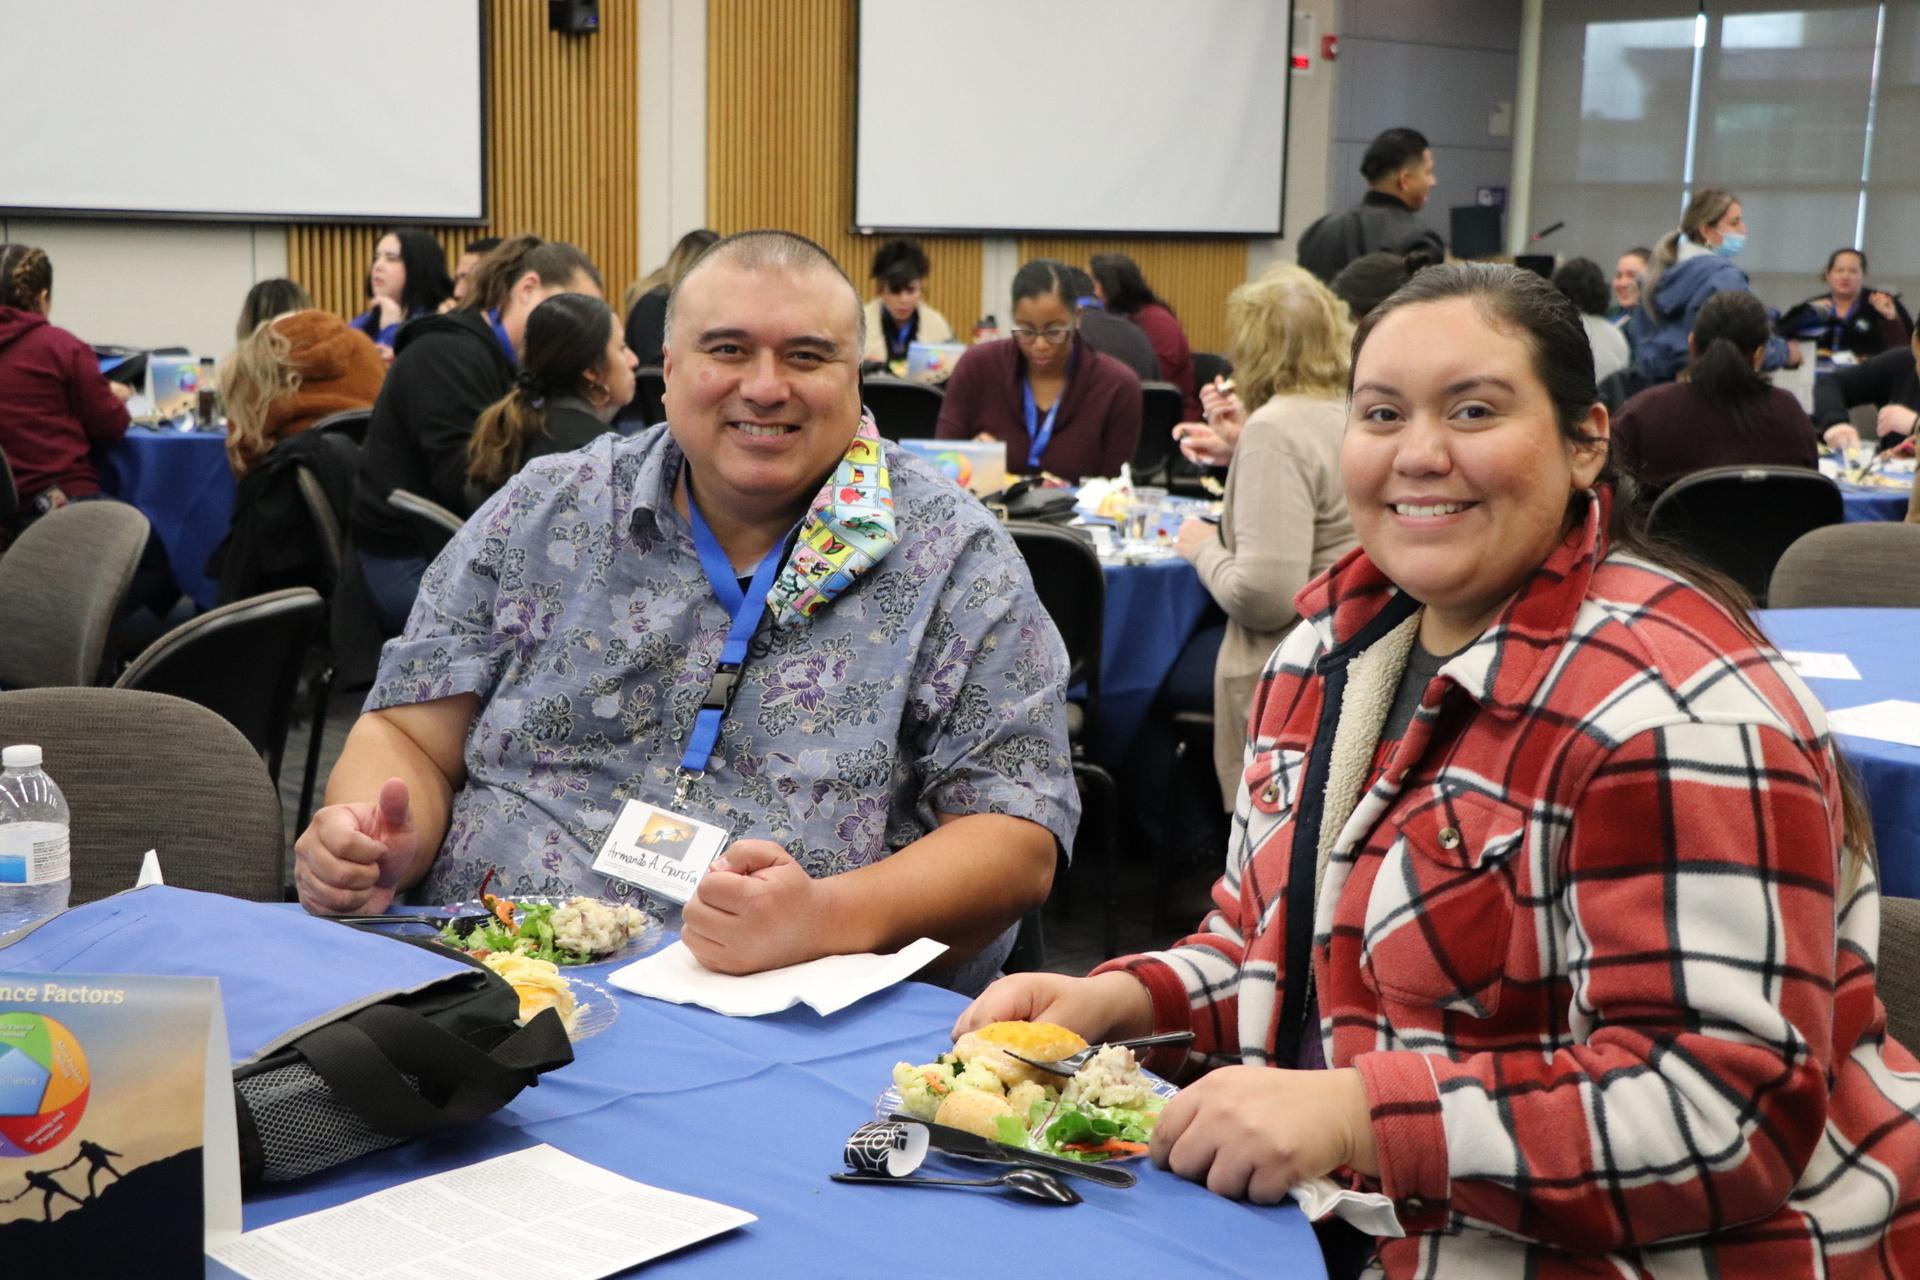 A photo of two counselors smiling while eating lunch